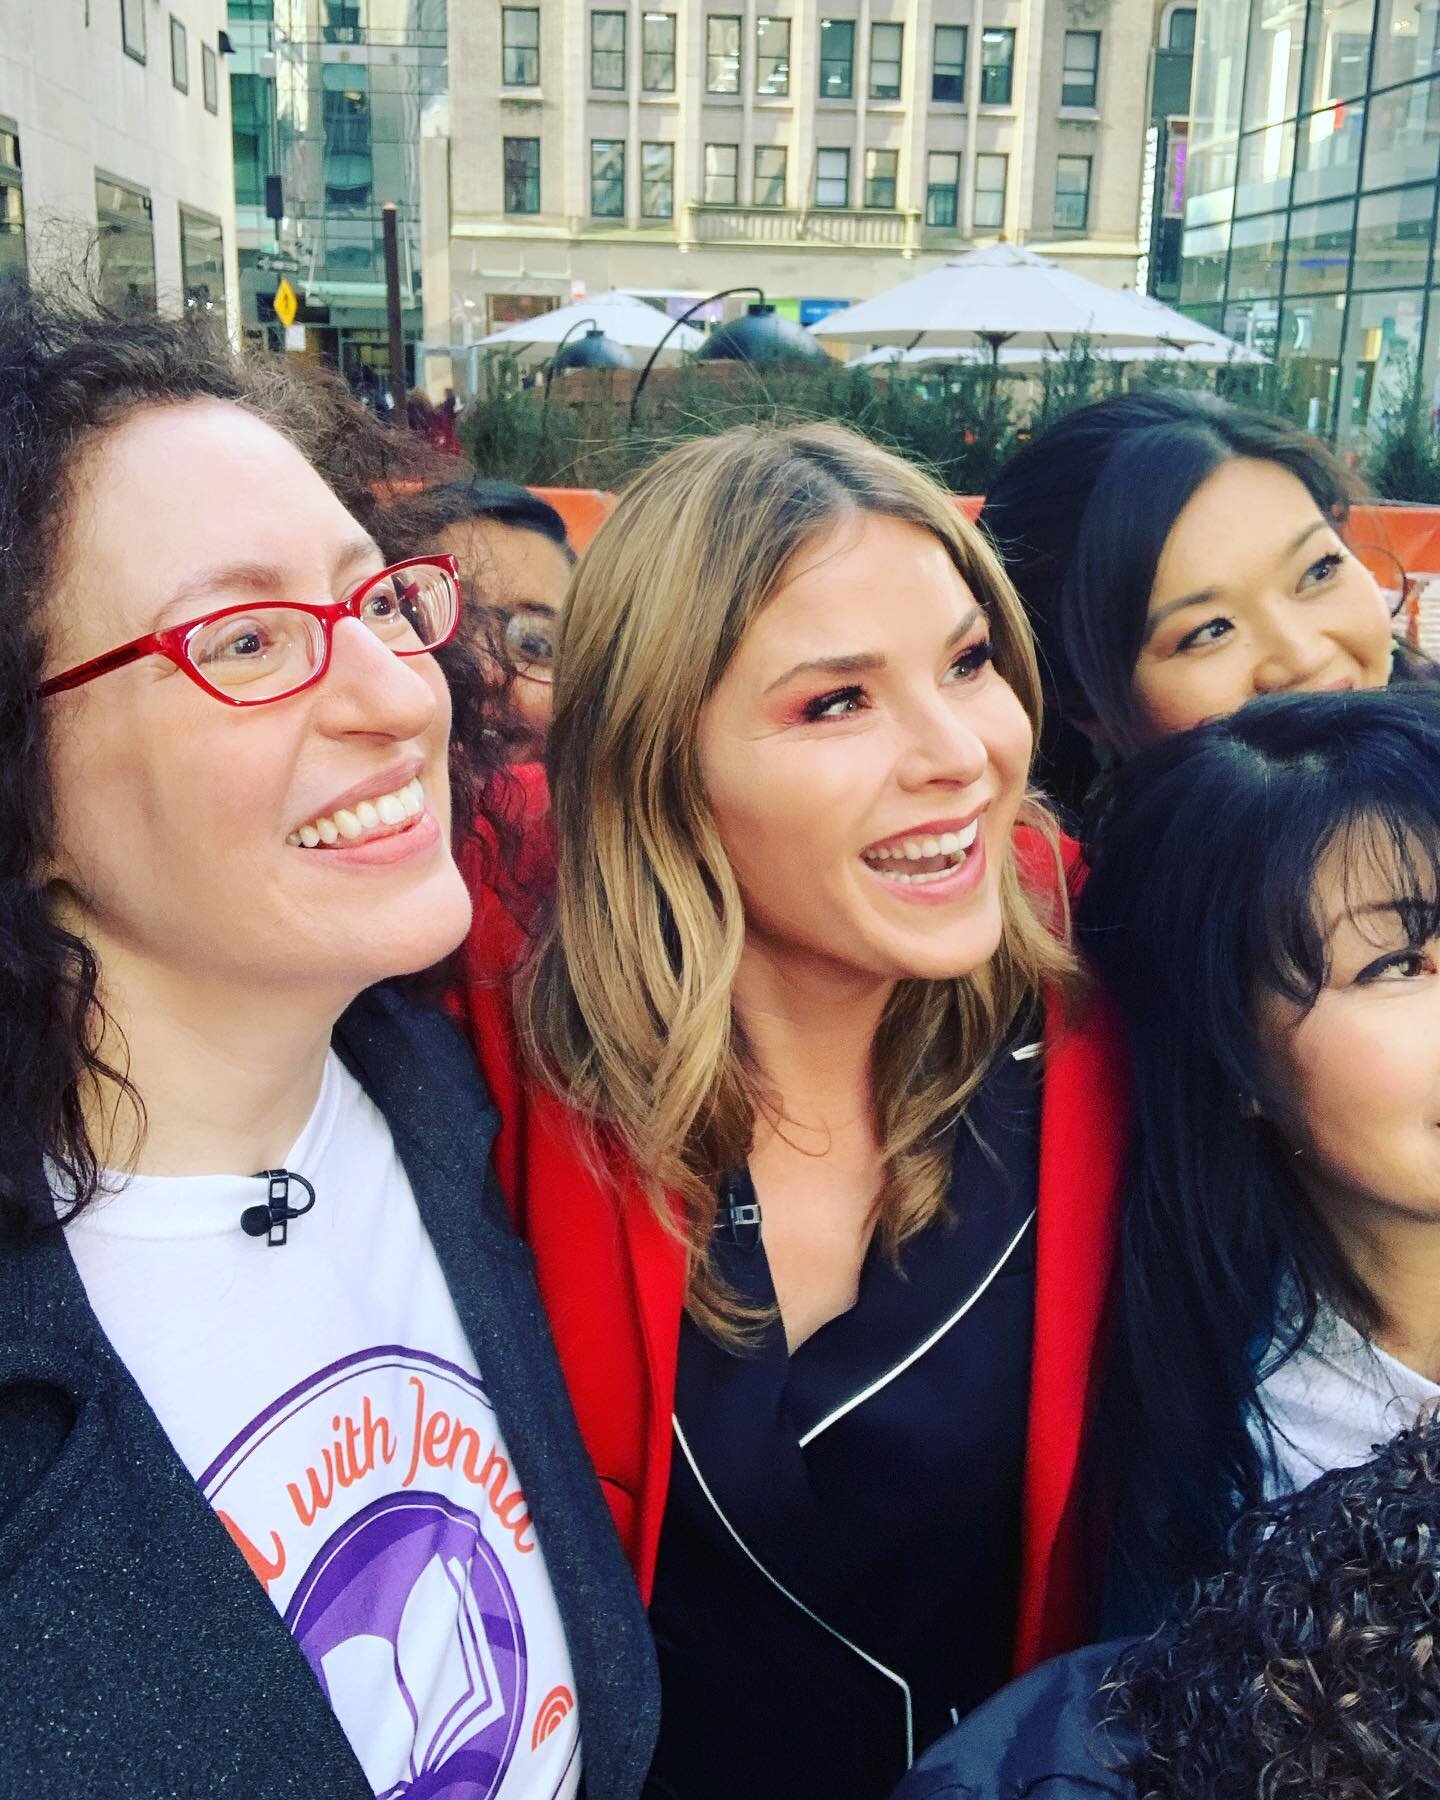 I was at the Today Show this morning with a whole bunch of the Read With Jenna authors. It was humbling and inspiring at the same time. I&rsquo;m the worst photographer of all time, but managed to get these faces in focus: @jennabhager @laurenfoxwrit